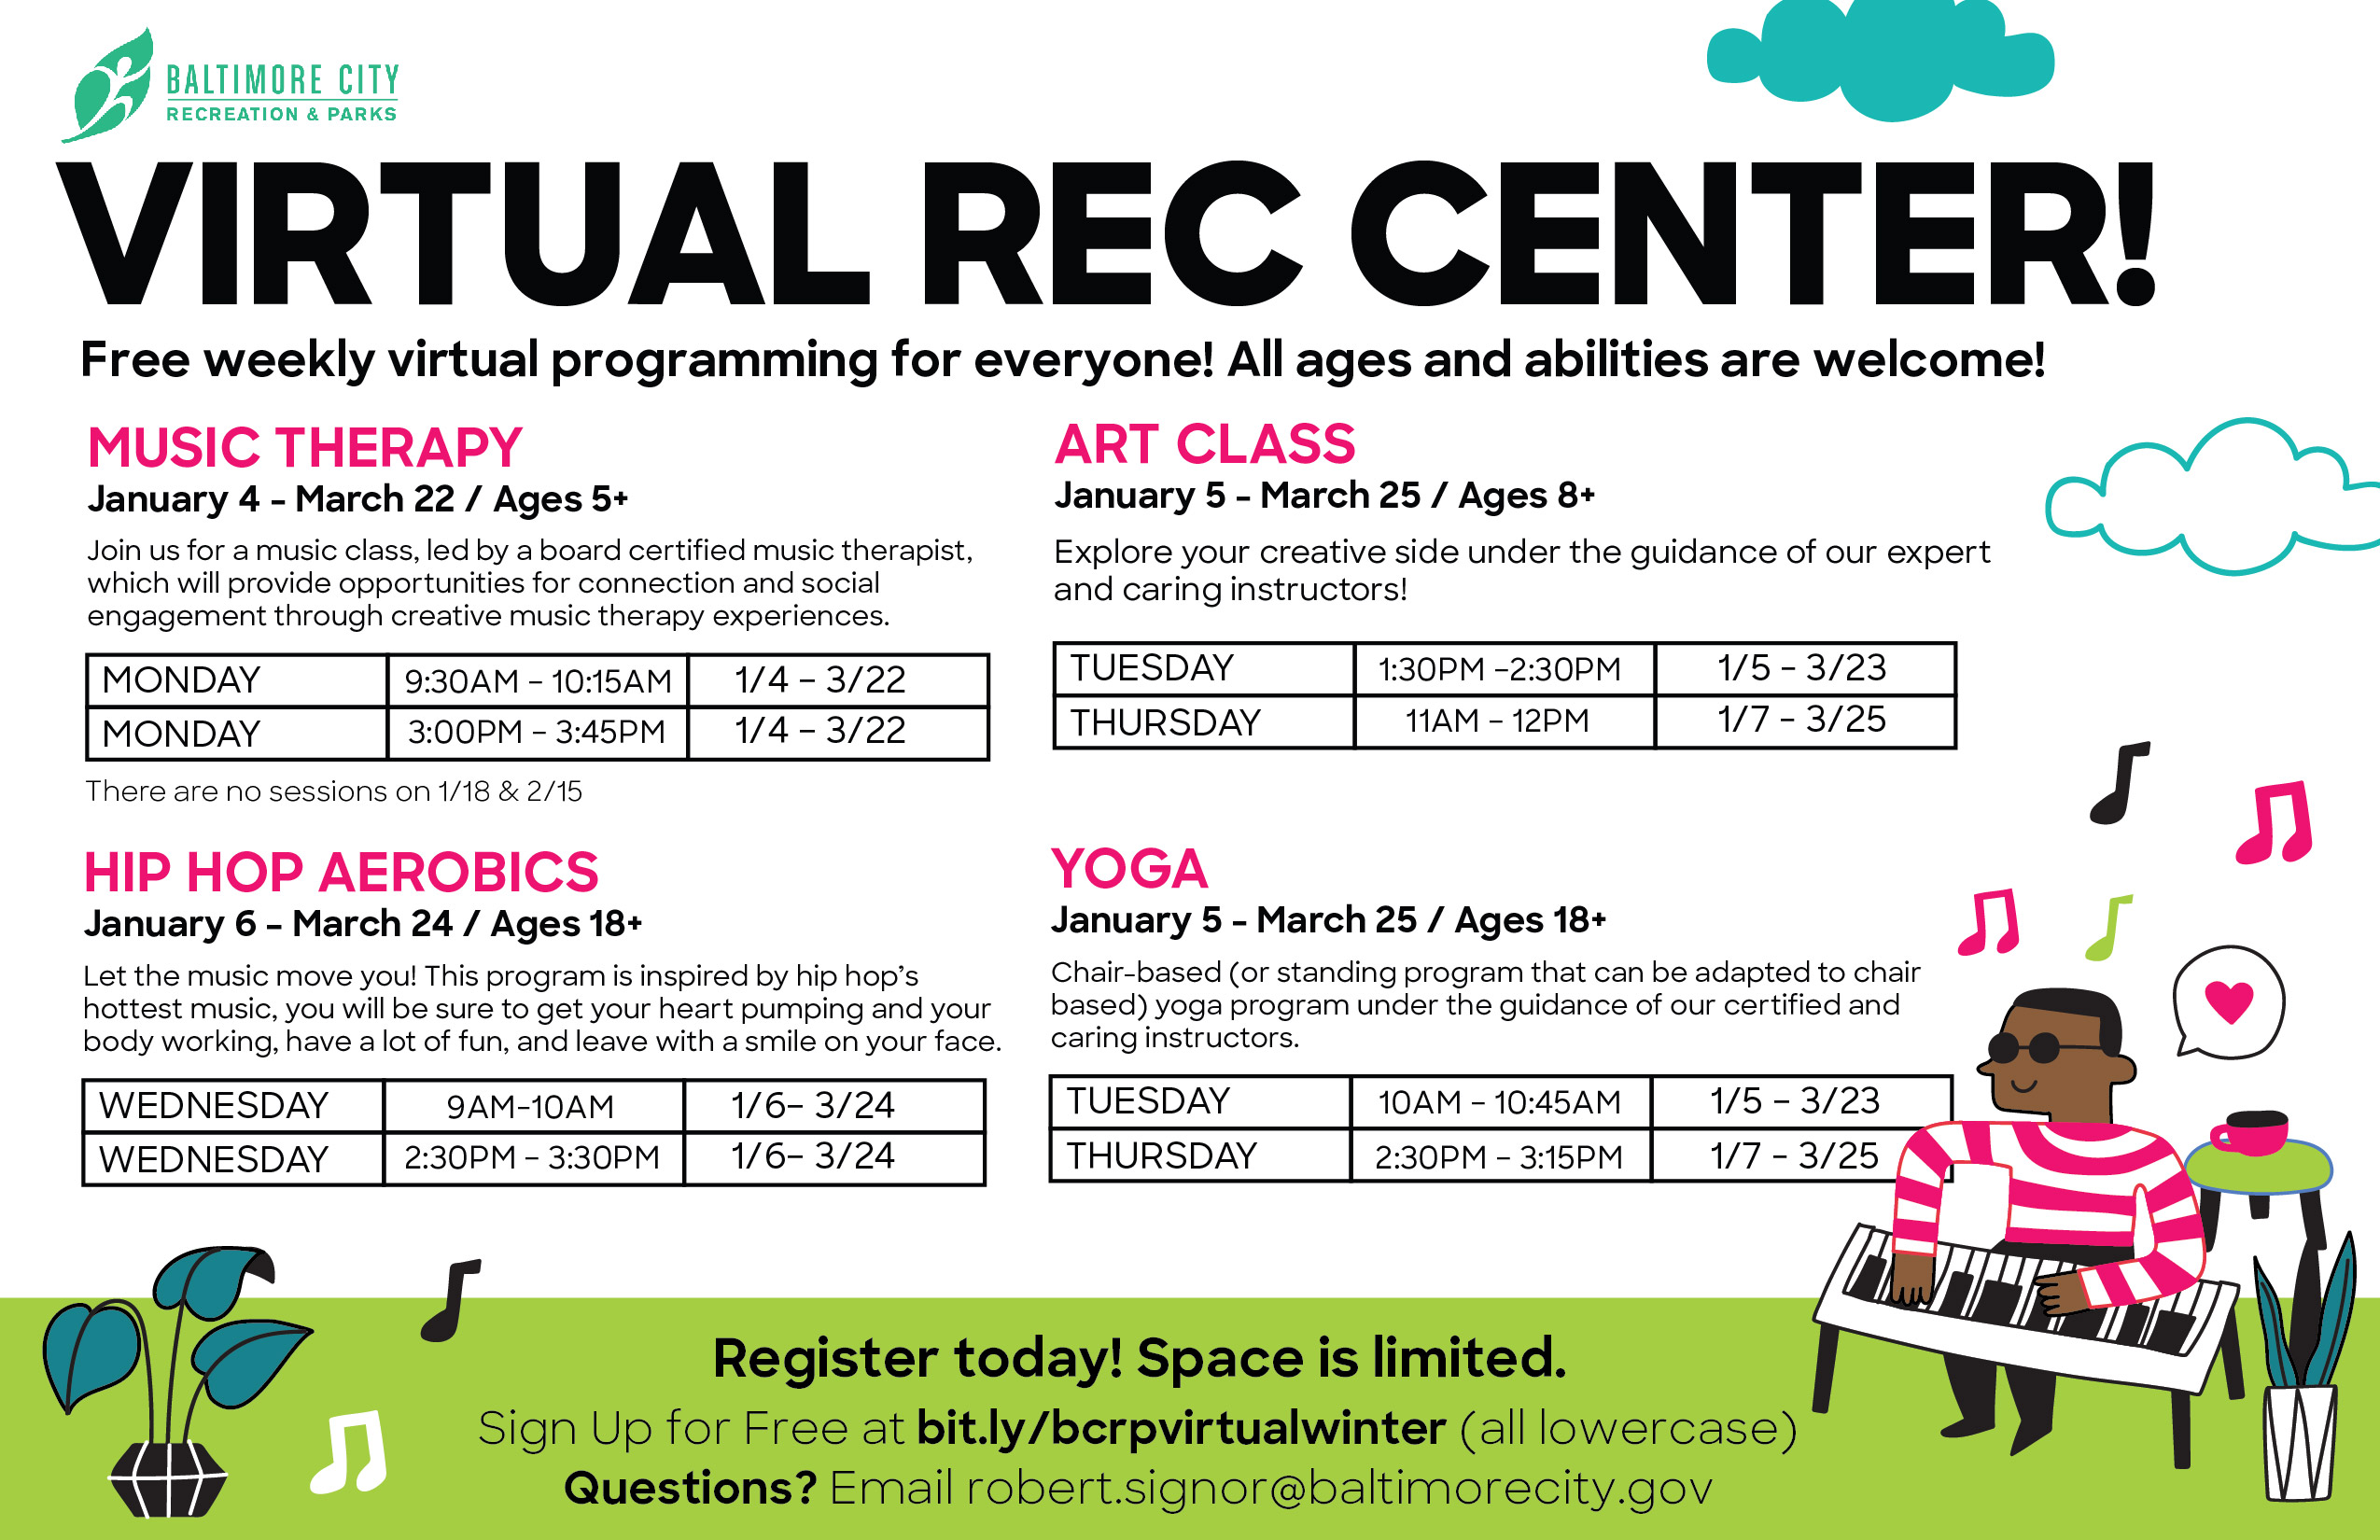 Virtual Recreation Schedule Dates and Times, locations.